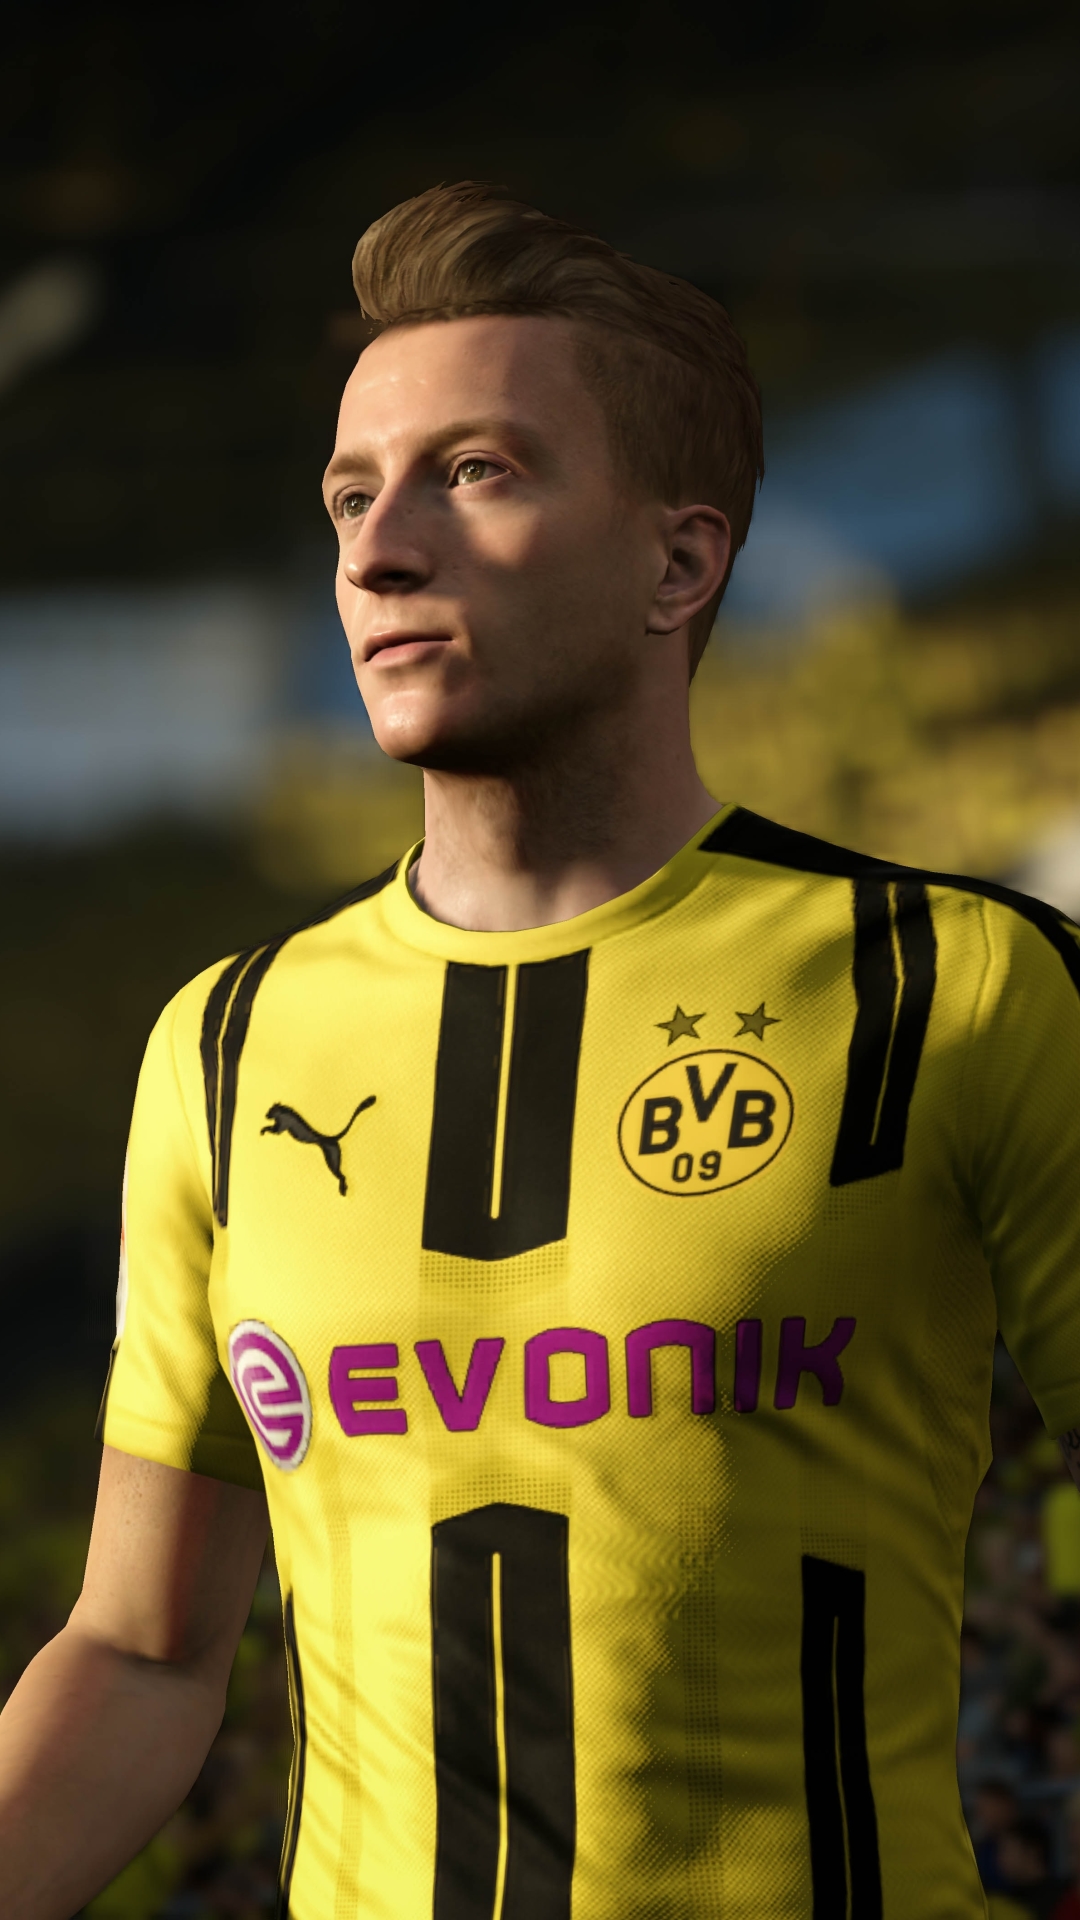 FIFA 17 Wallpapers